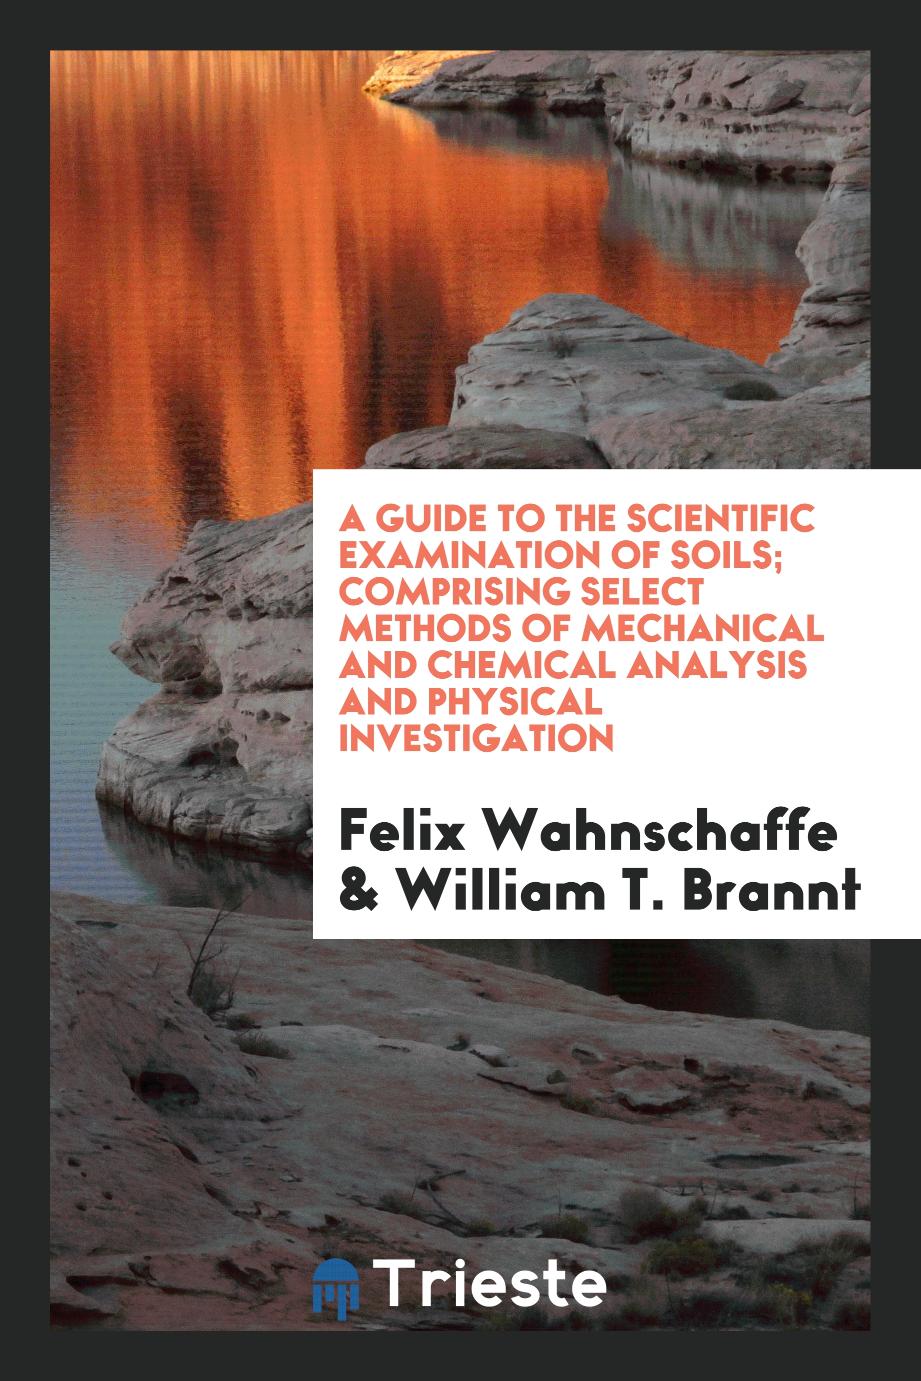 A guide to the scientific examination of soils; comprising select methods of mechanical and chemical analysis and physical investigation